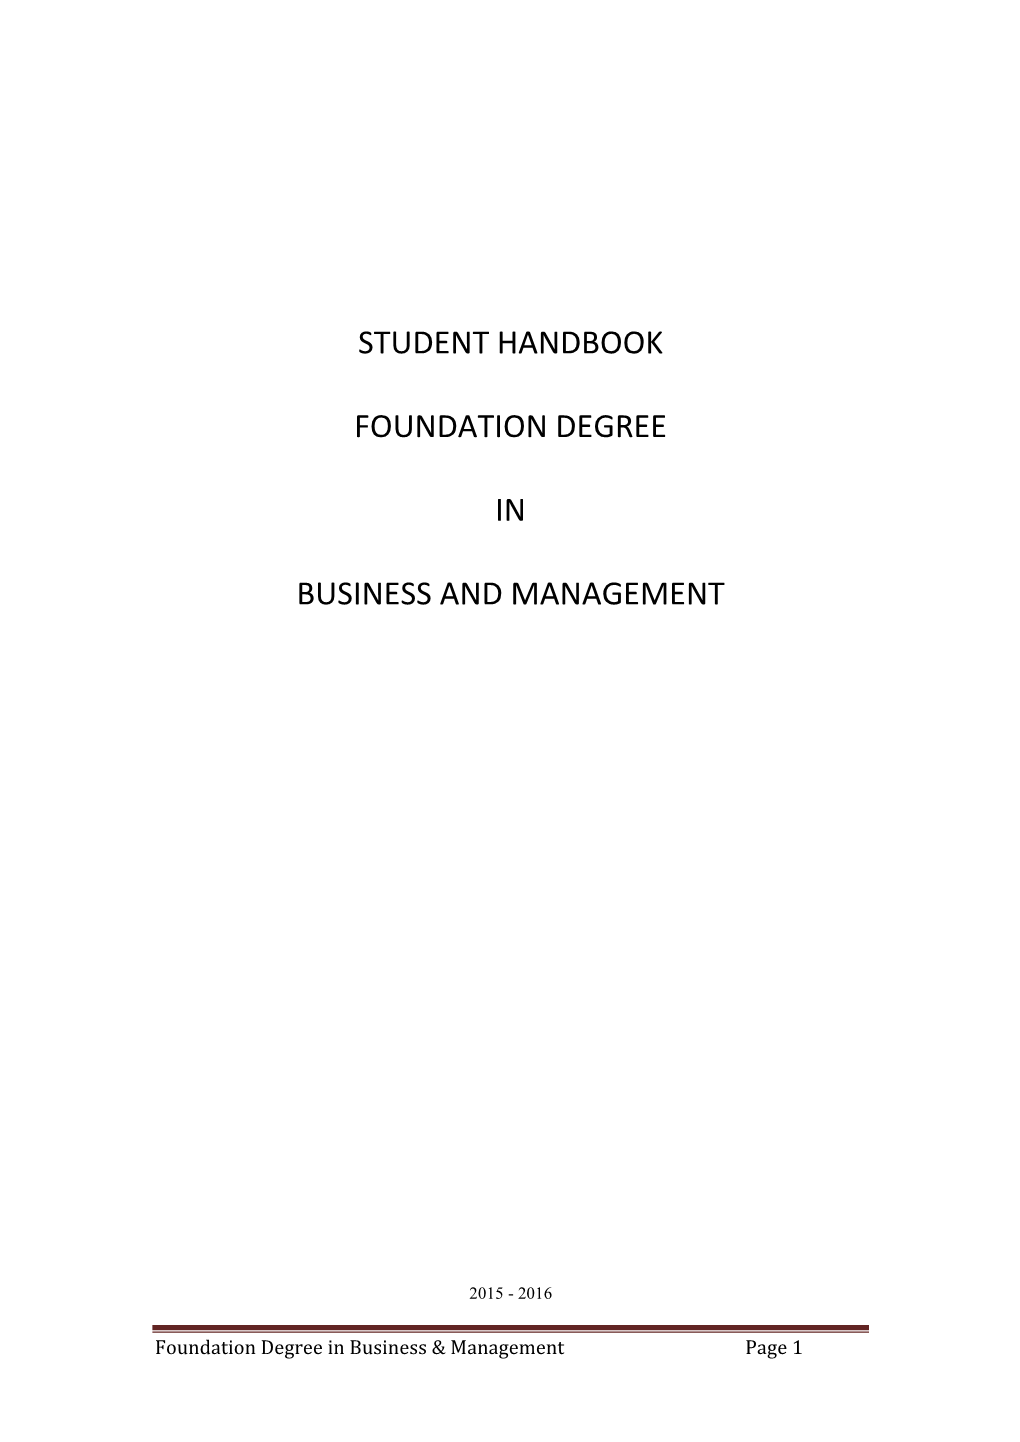 Student Handbook Foundation Degree in Business and Management